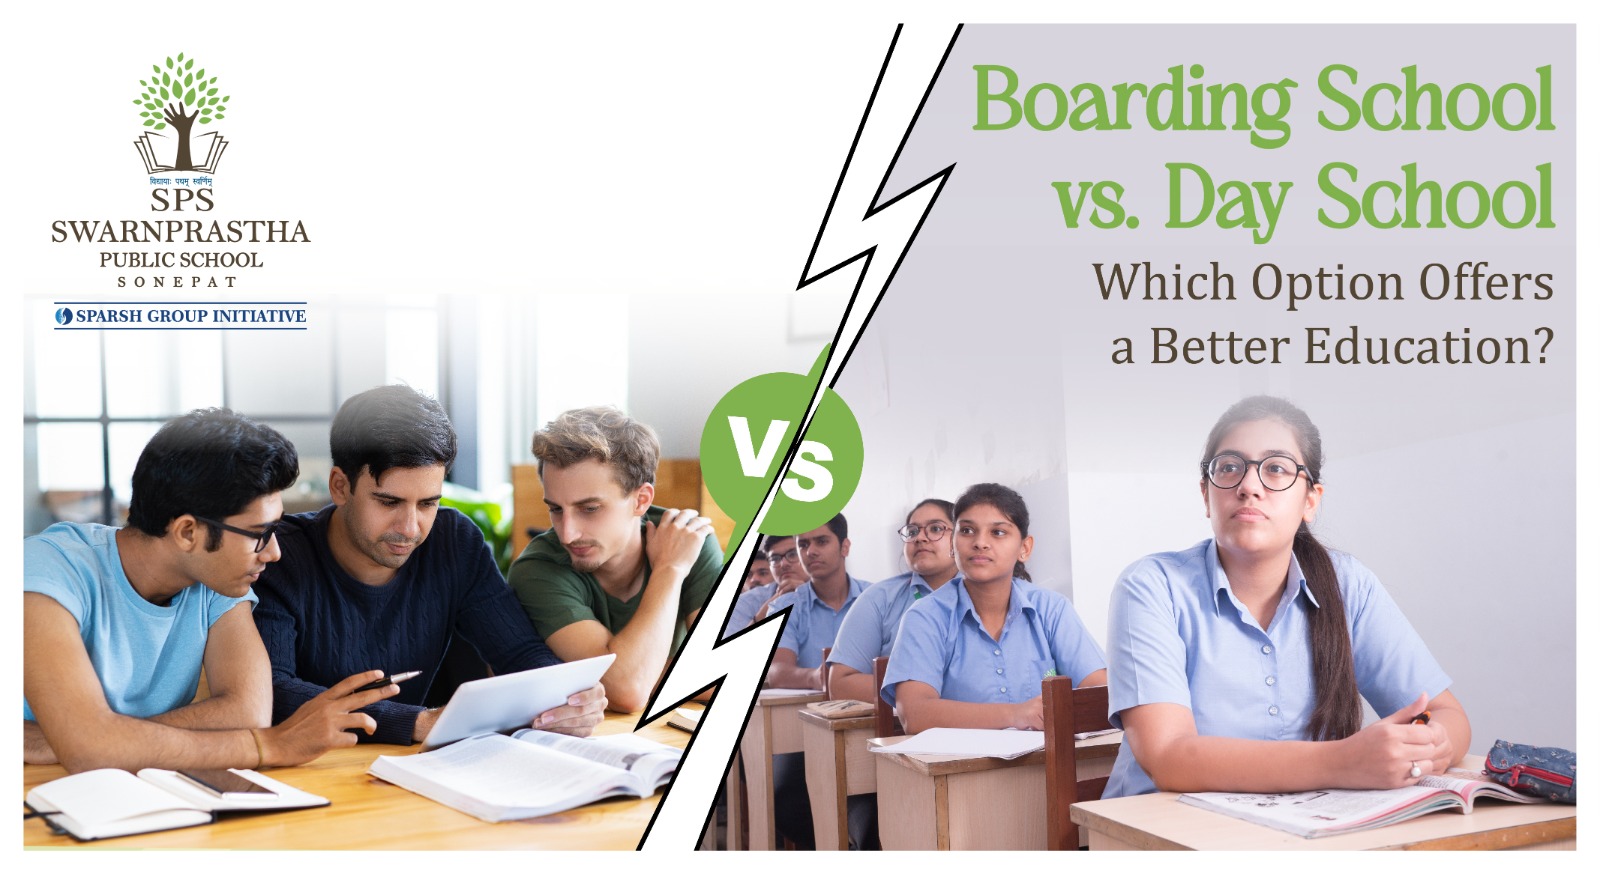 Boarding School vs. Day School: Which Option Offers a Better Education?